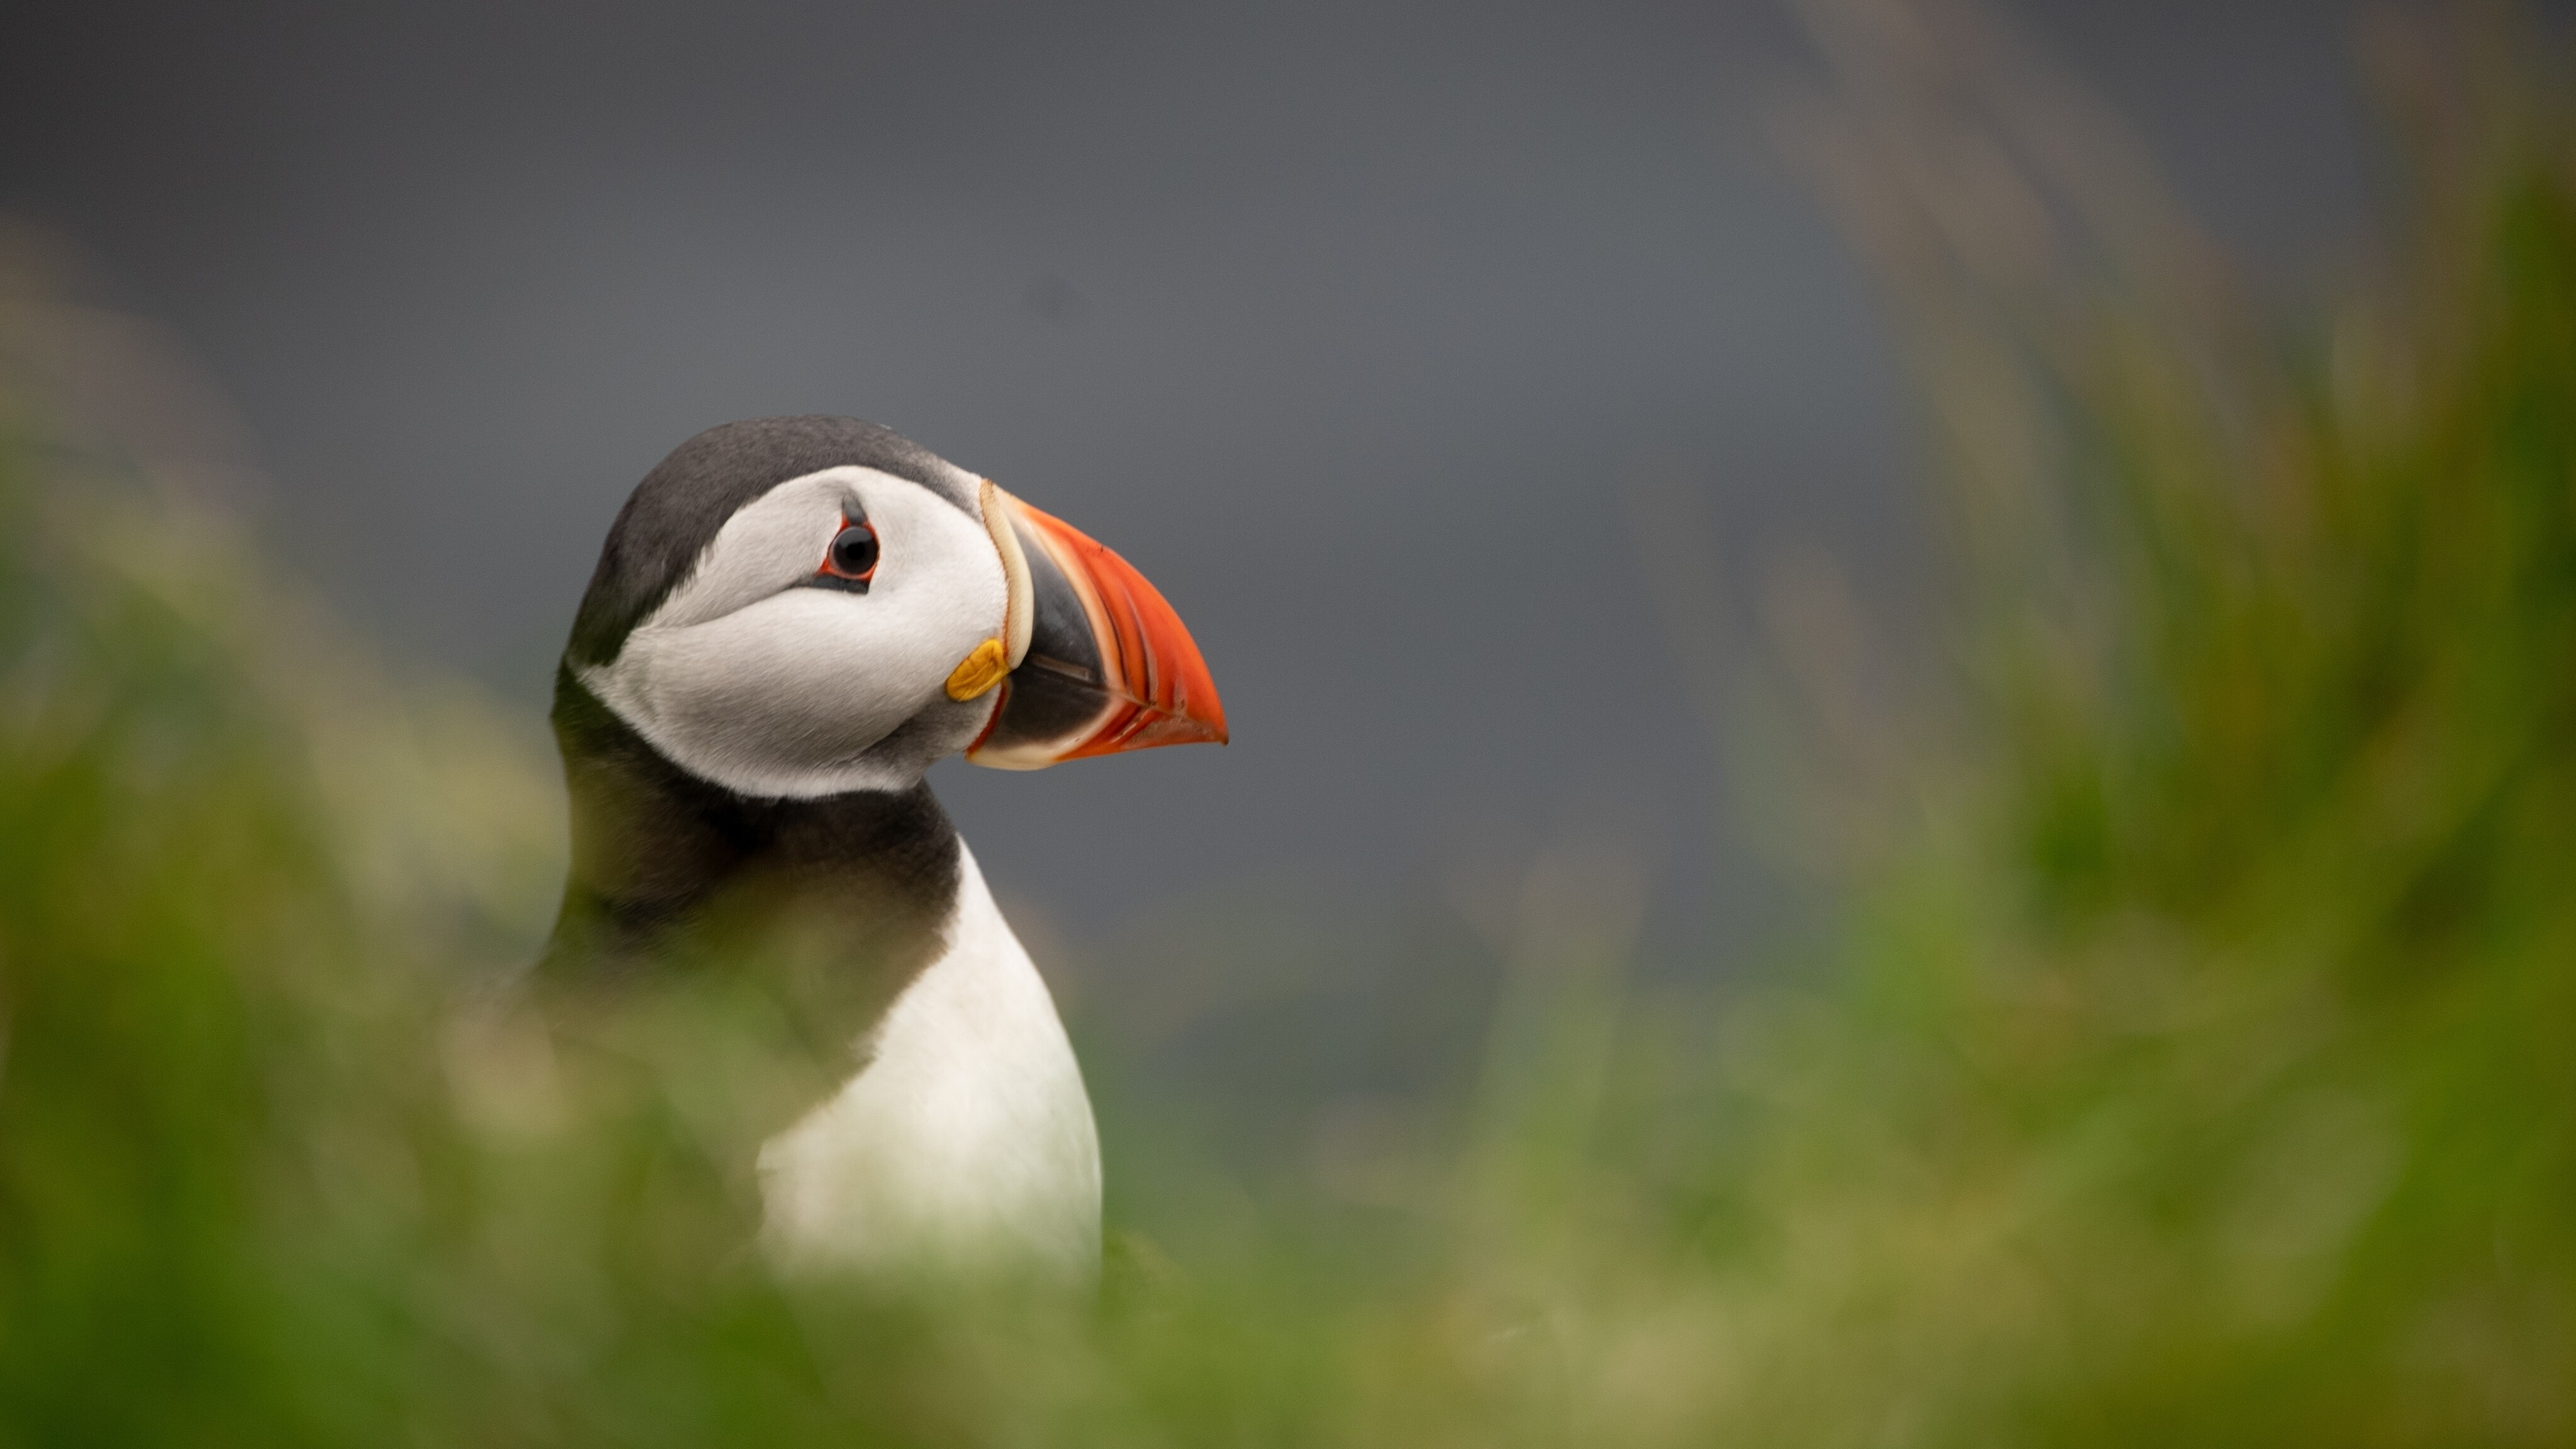 Puffin on a cliff face. (National Geographic for Disney+/Jonjo Harrington)